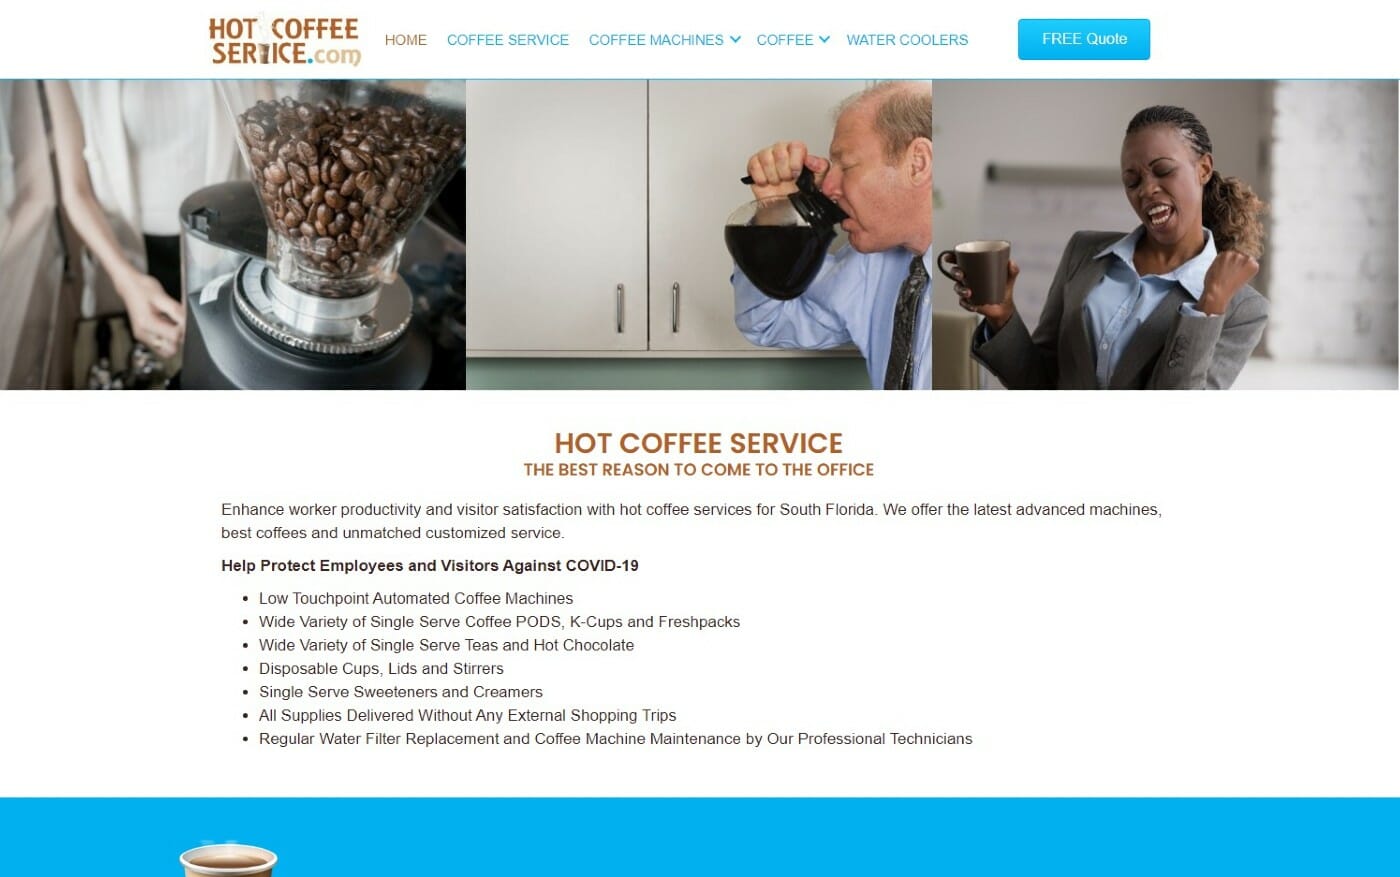 hotcoffeeservice local business site